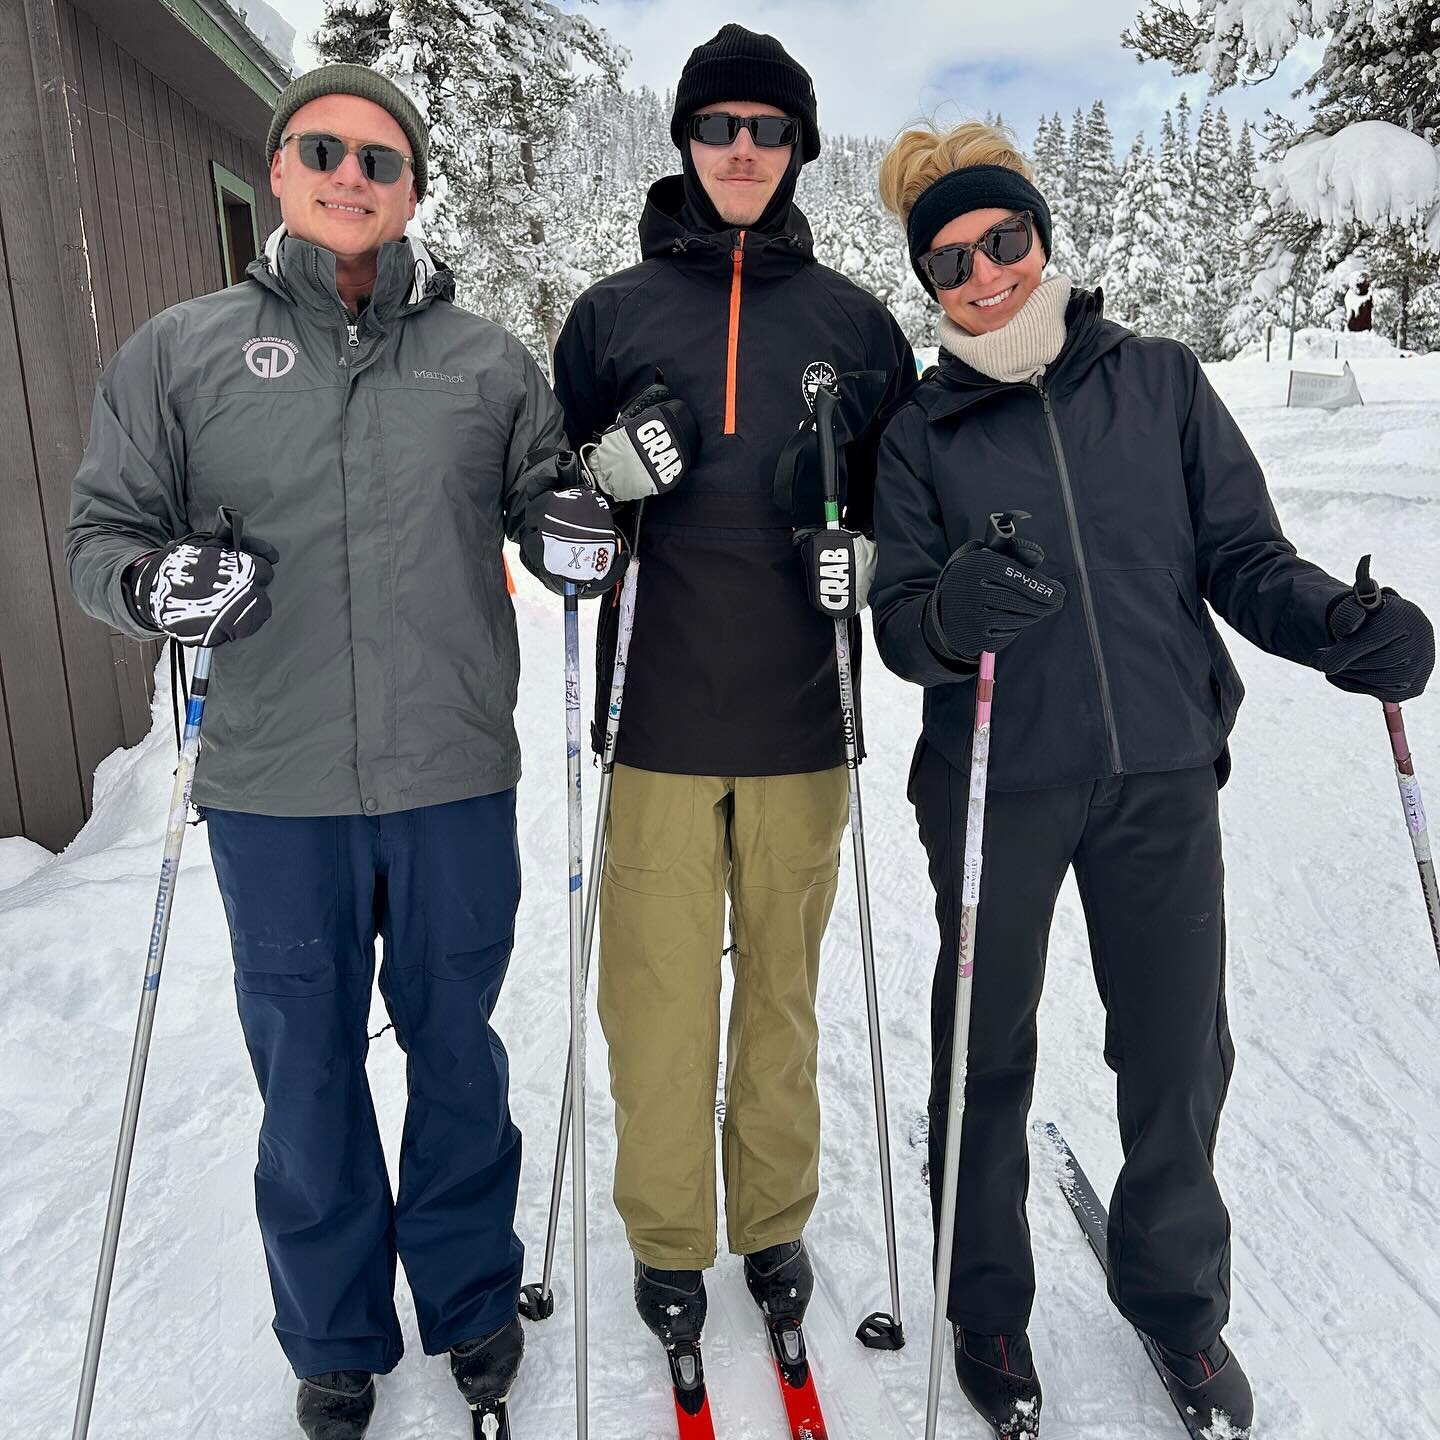 Family ski days are the best!